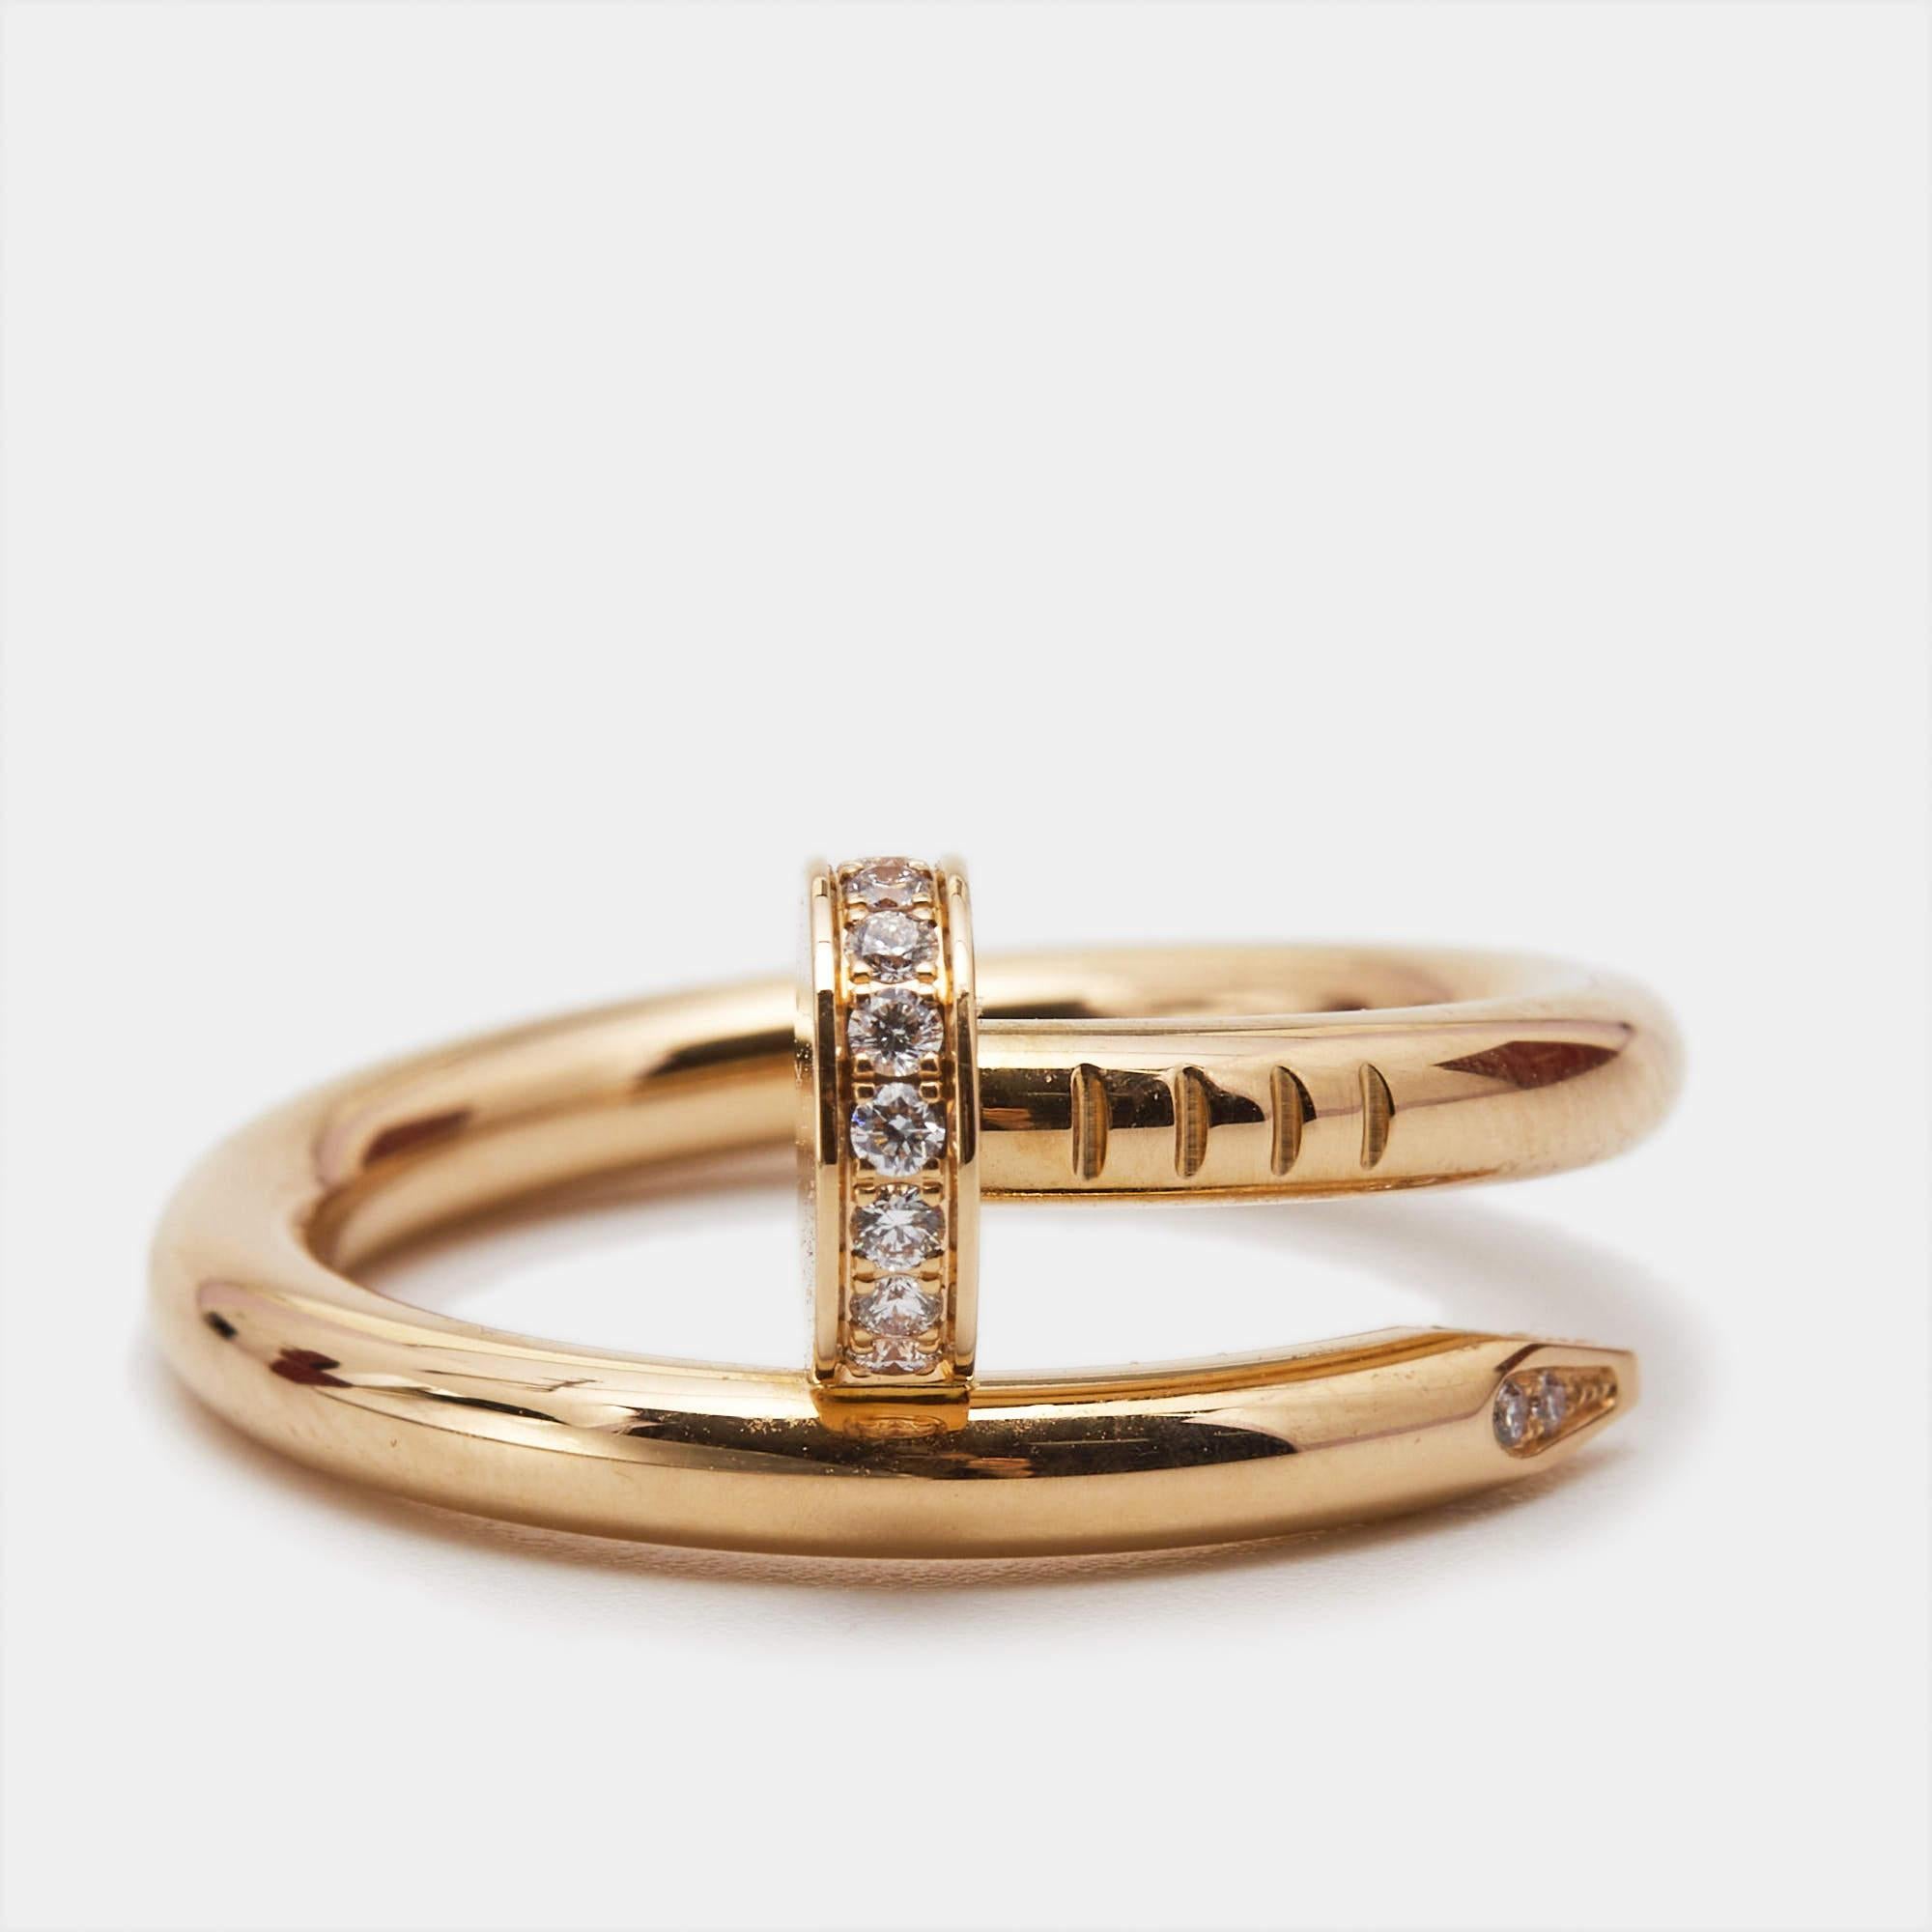 The Juste Un Clou collection from Cartier is all about making ordinary objects into exquisite pieces of jewelry. This creation proudly represents the expertise and talent of the artisans working with Cartier to deliver to you only the very best. The